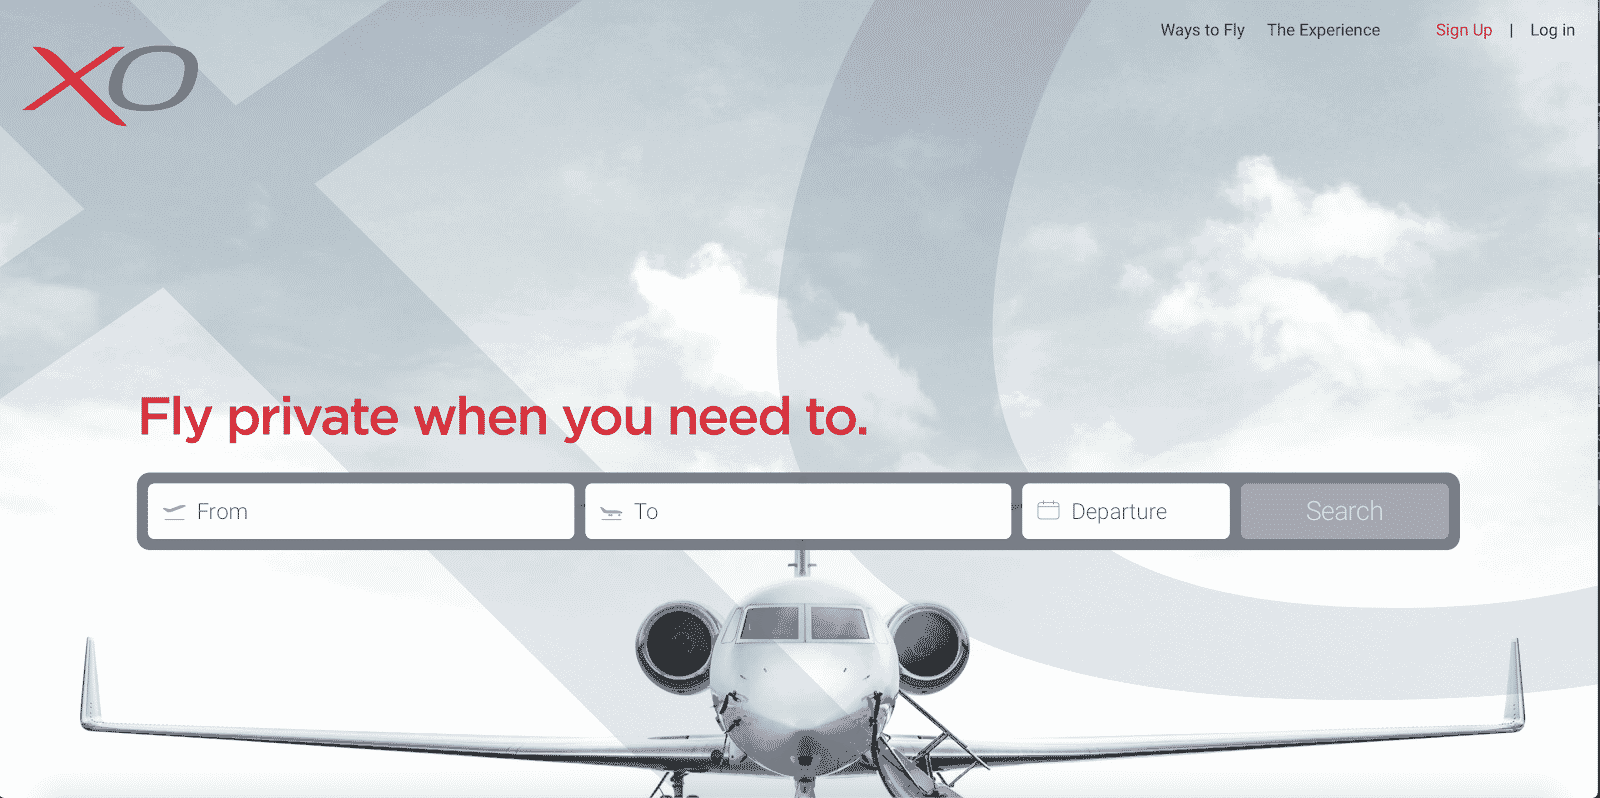 The XOJET homepage